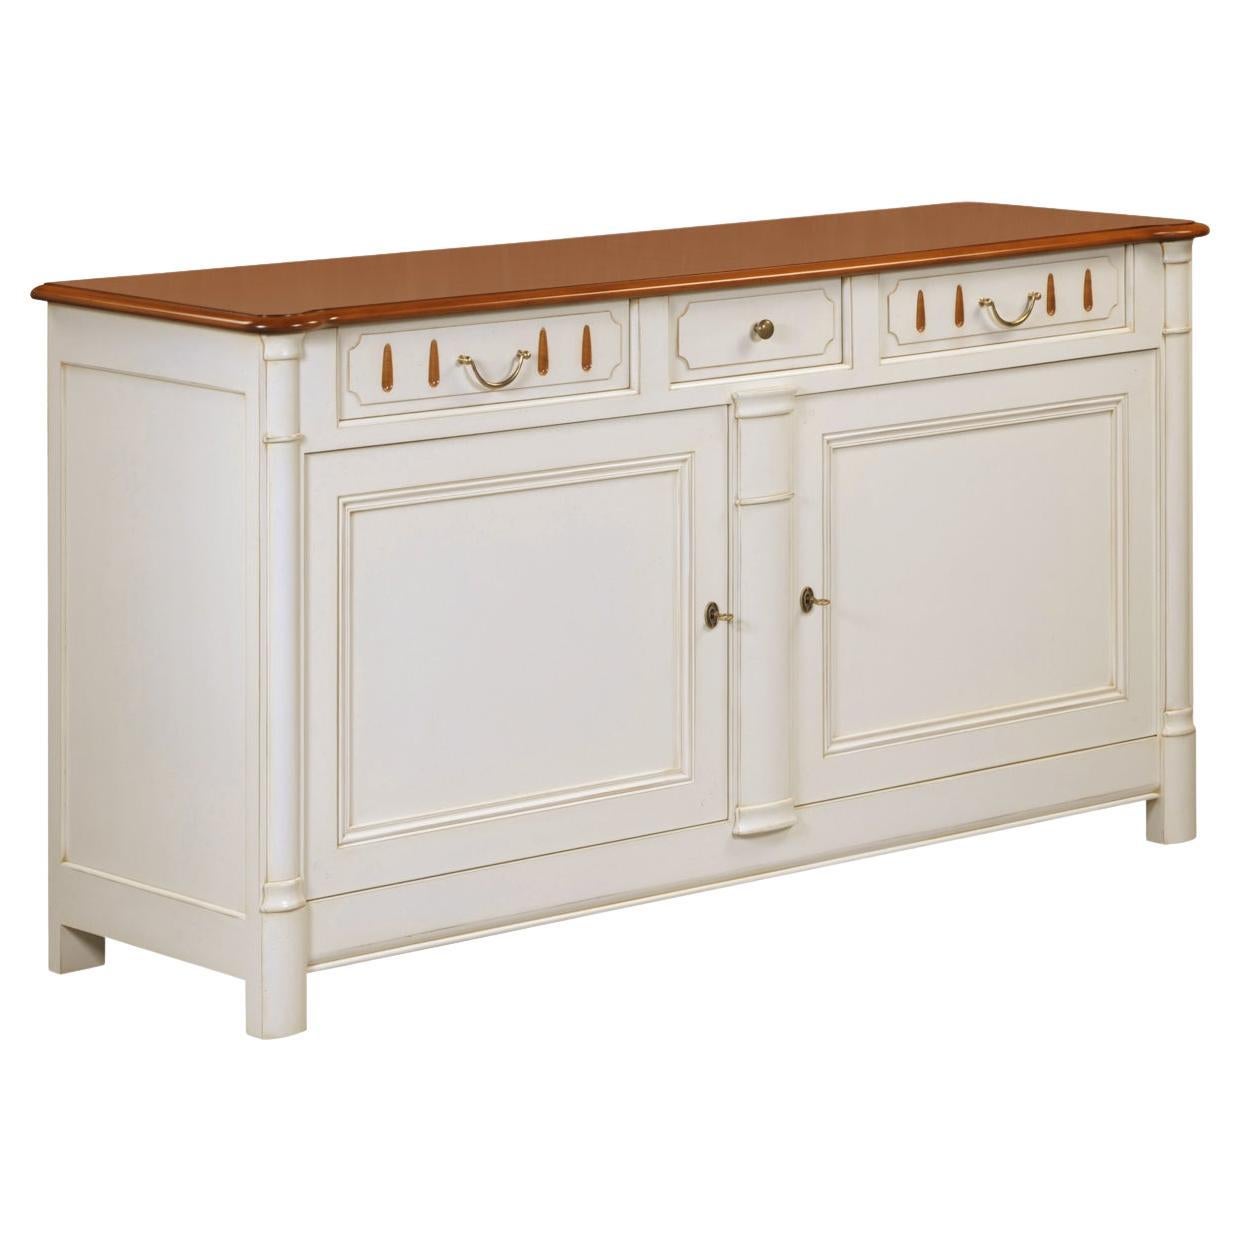 French Tradition 2-Door Buffet in Cherry, 3 Drawers and White-Cream Lacquered For Sale